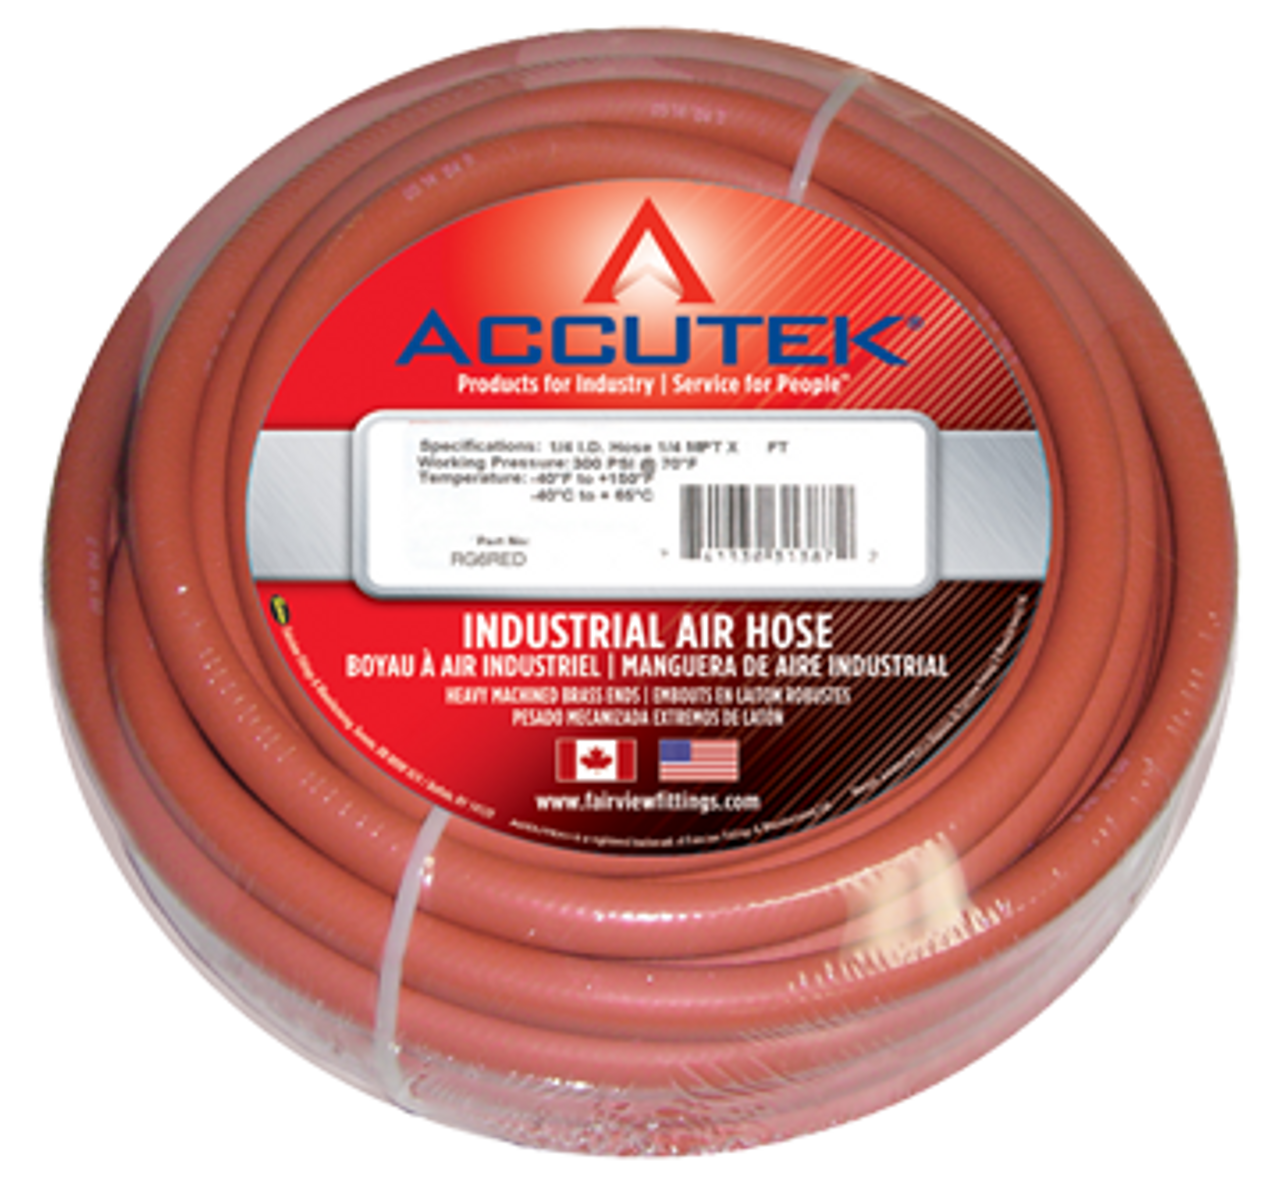 3/8 x 1/4" x 50' Red EPDM 250 PSI Rubber Air Hose Assembly - Brass Male NPT Ends  RG6/2RED-50B